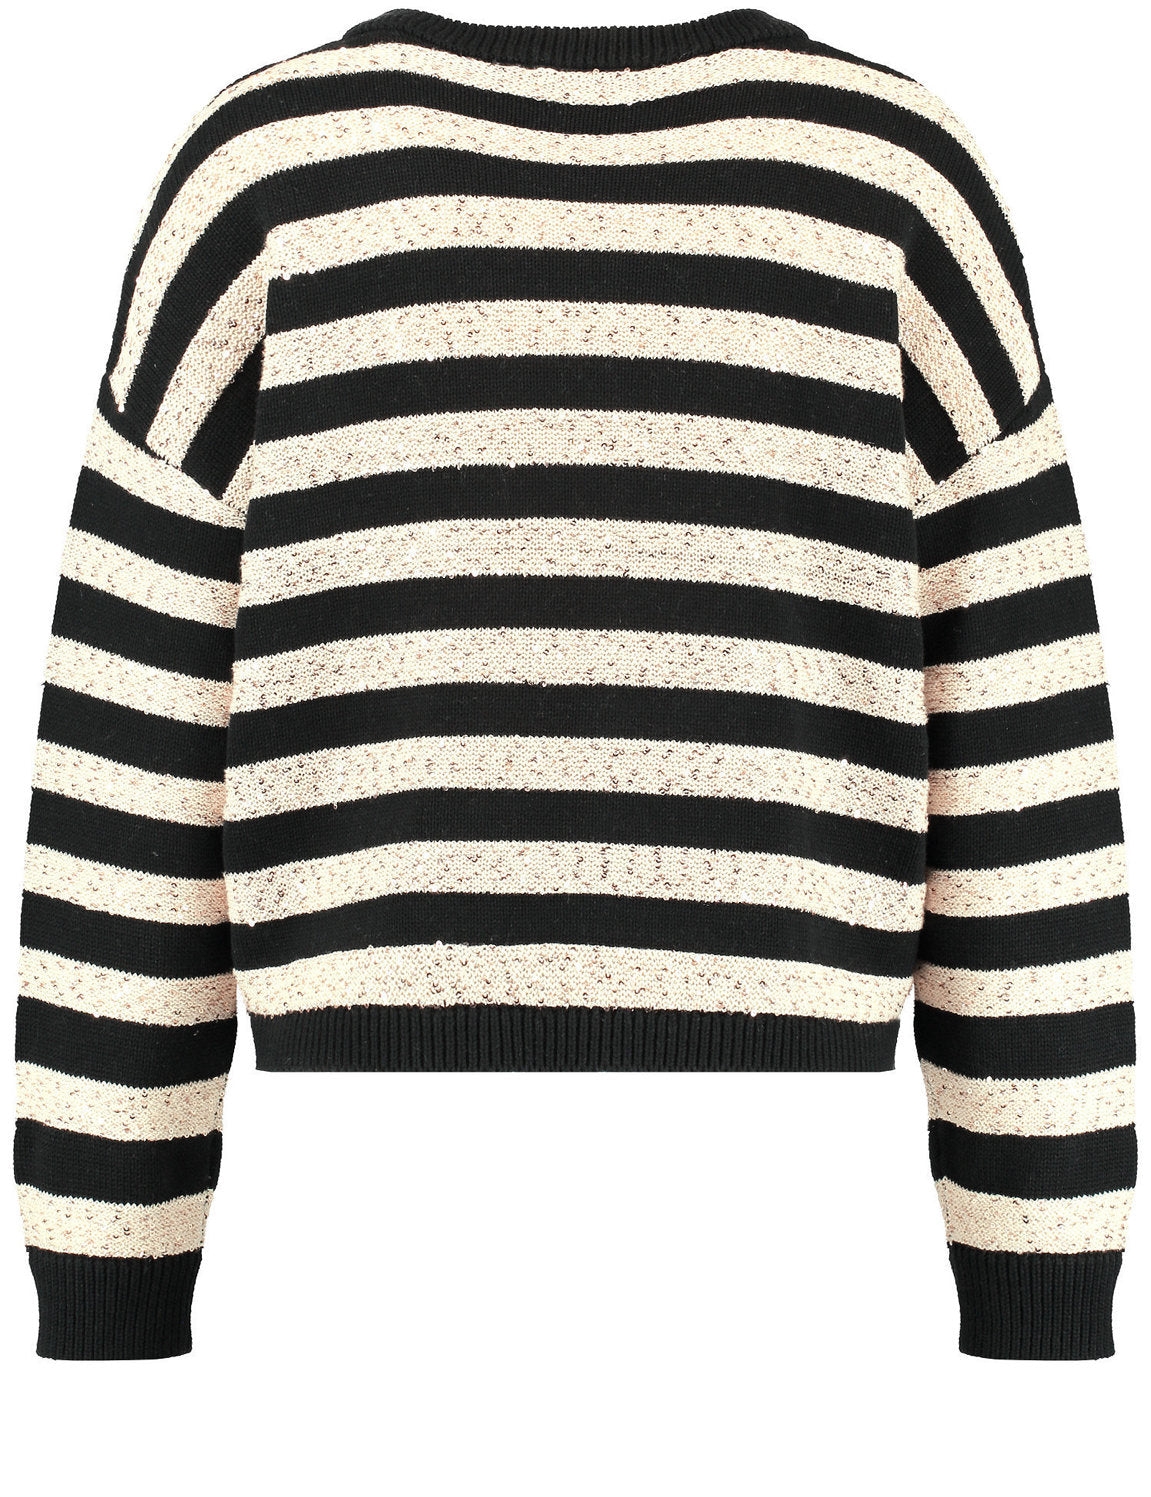 Striped Jumper With Sequin Embellishment_472414-15314_1103_03